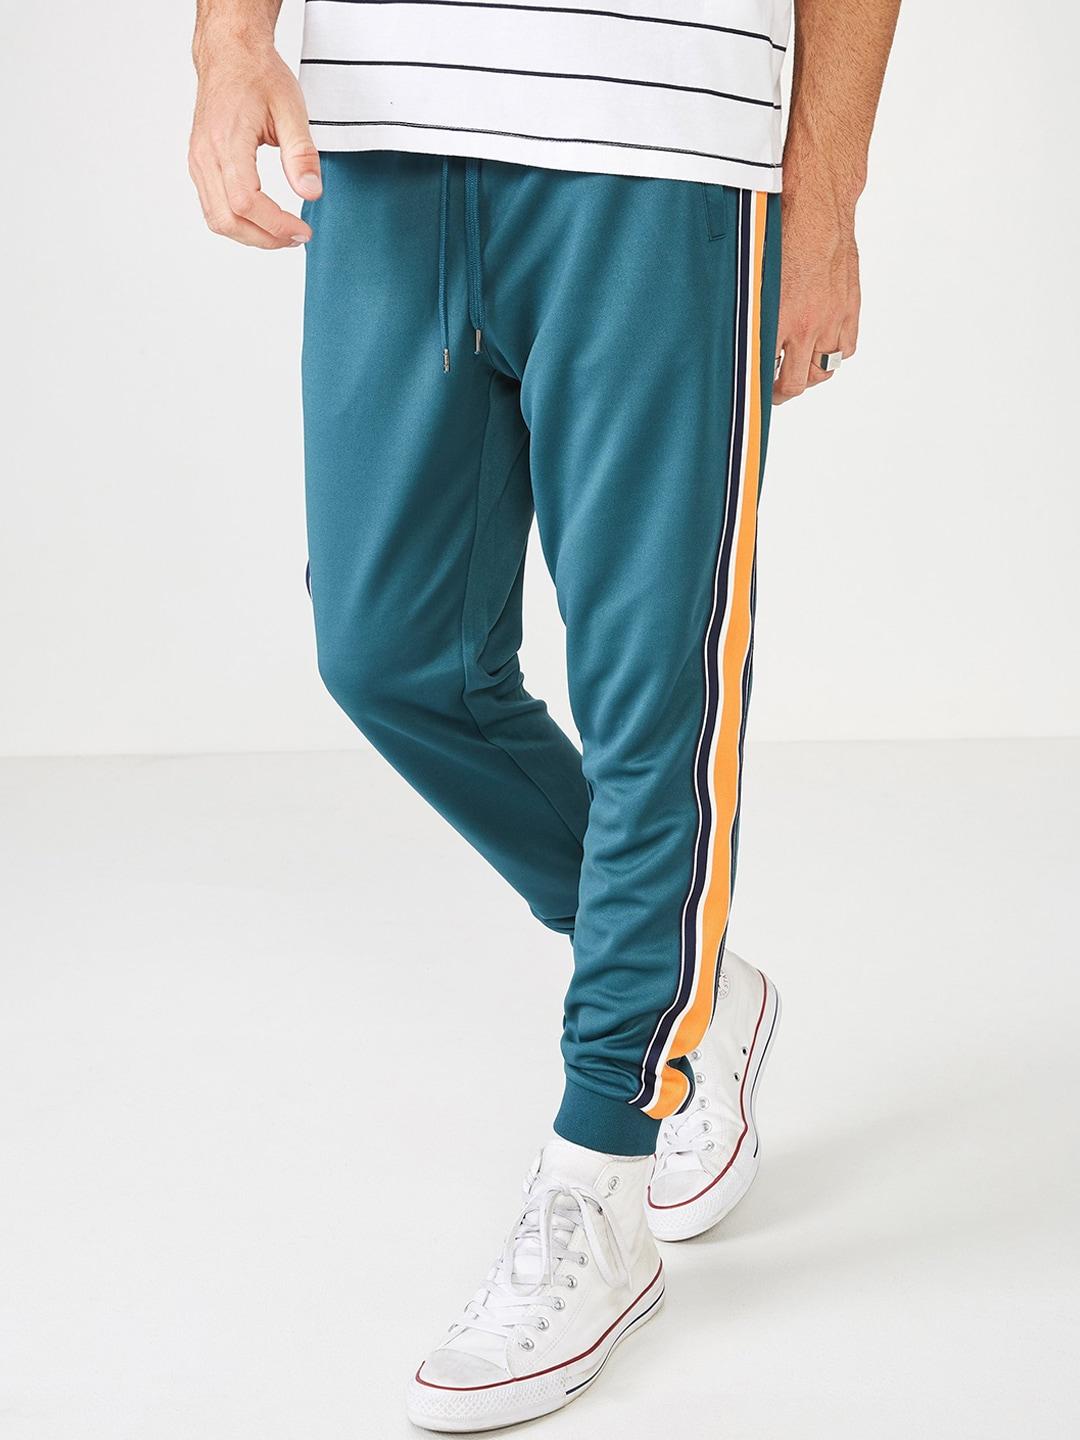 cotton-on-men-teal-green-slim-fit-solid-joggers